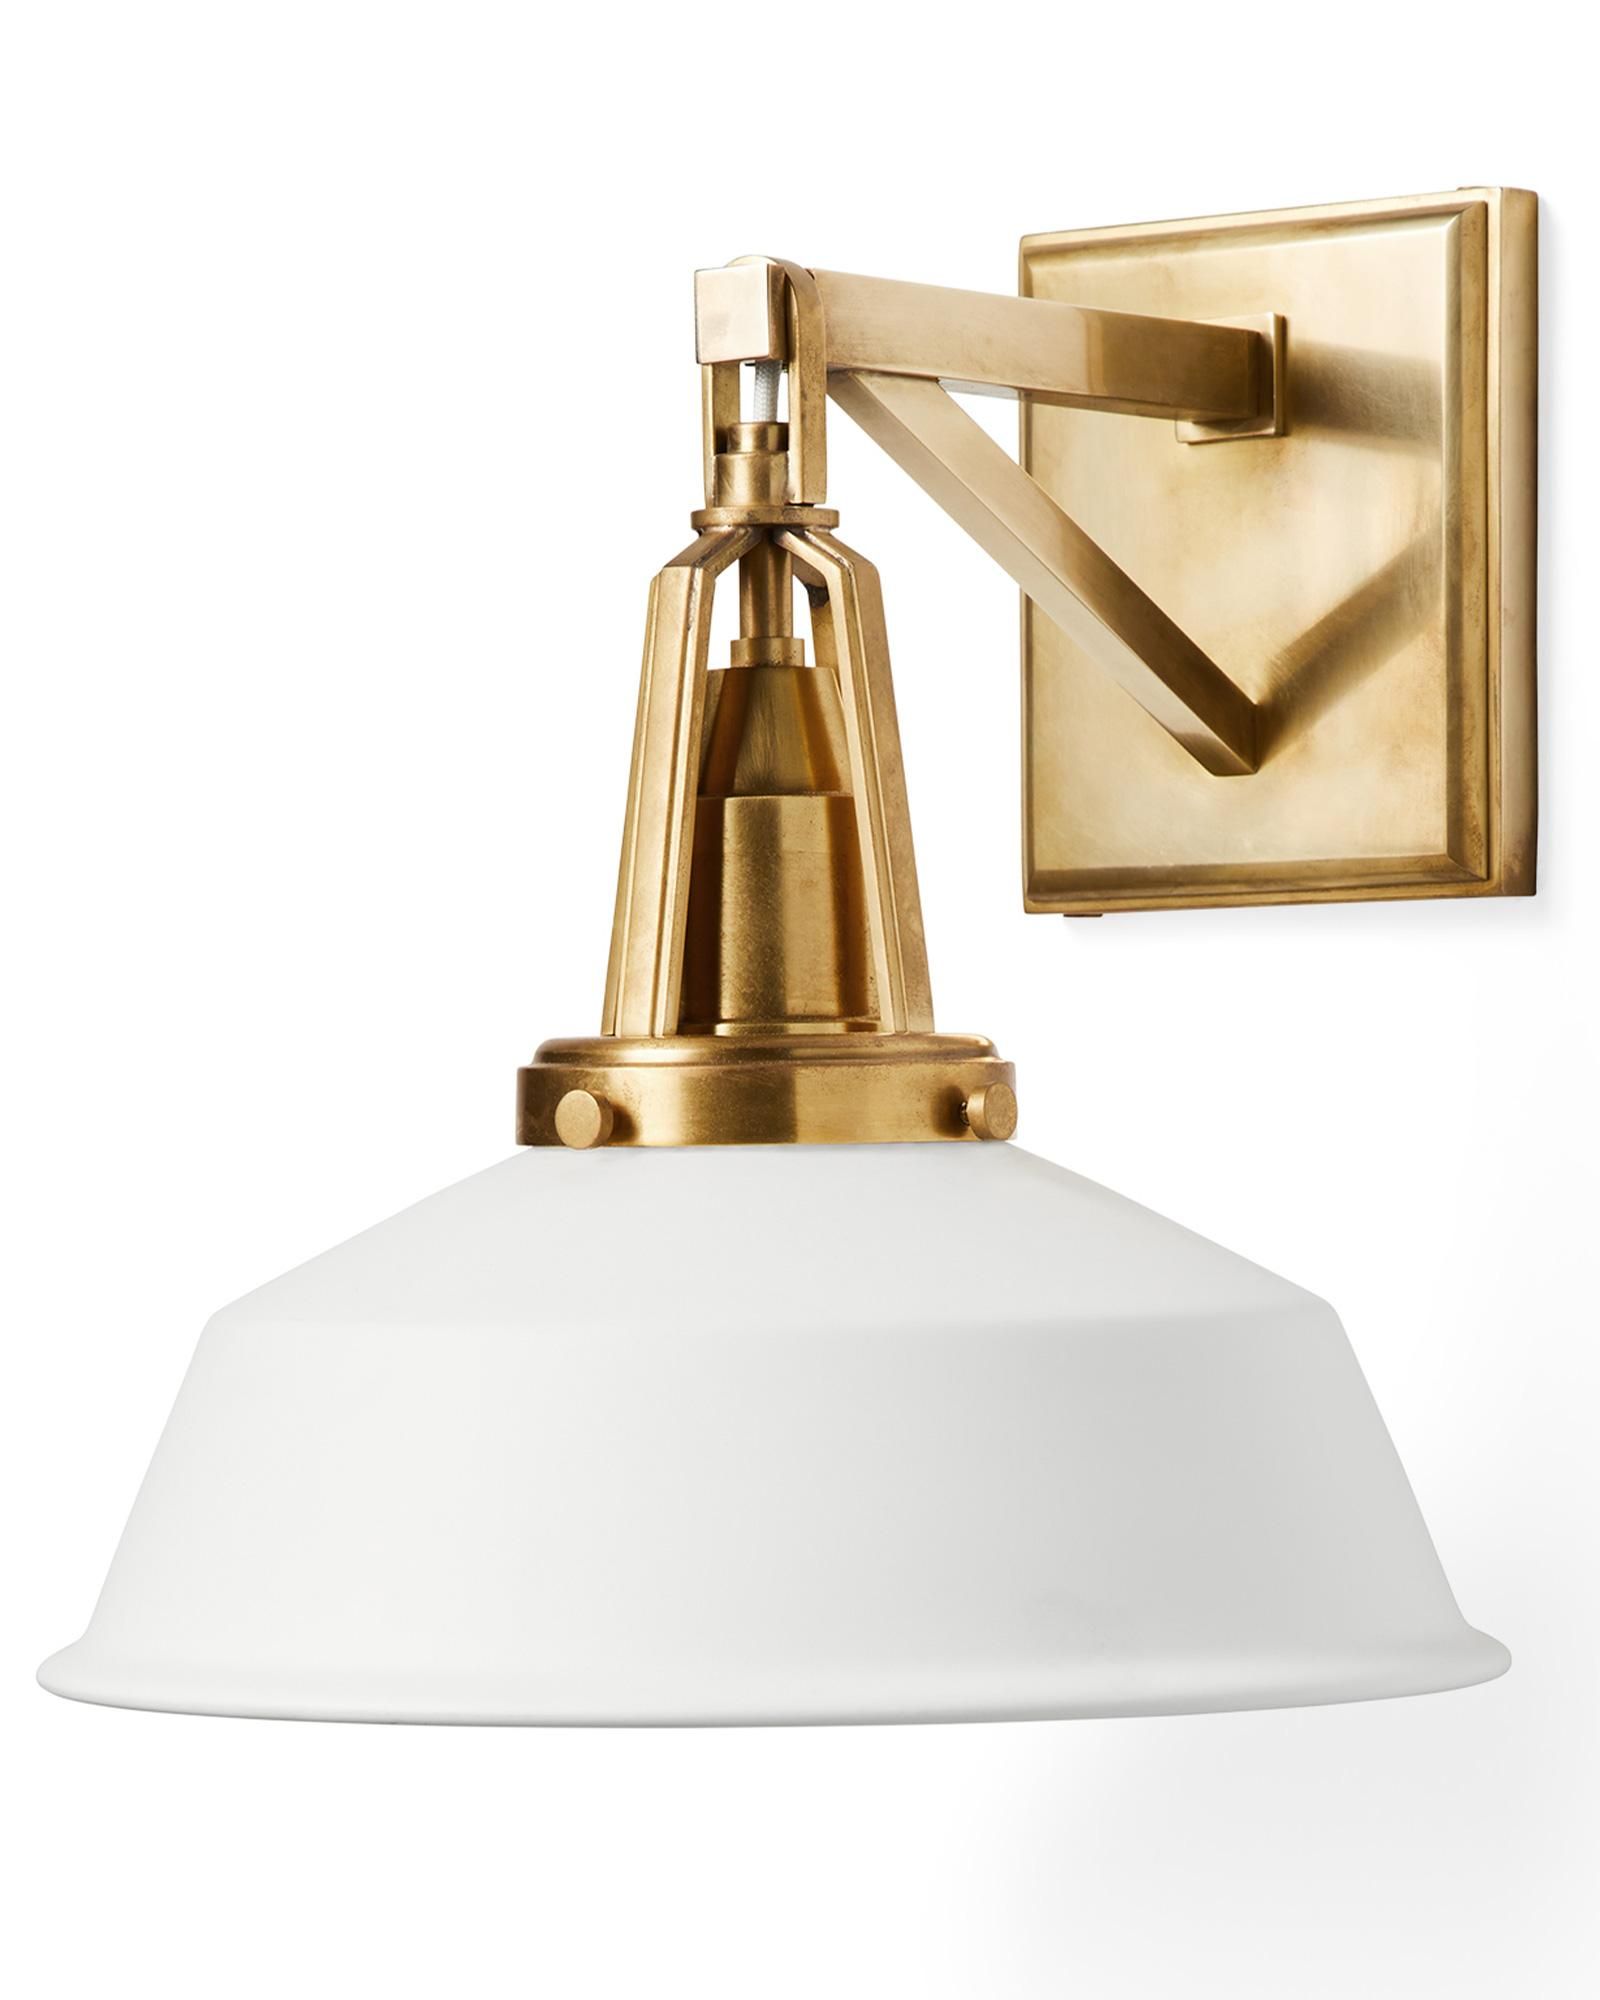 Lenox Sconce | Serena and Lily